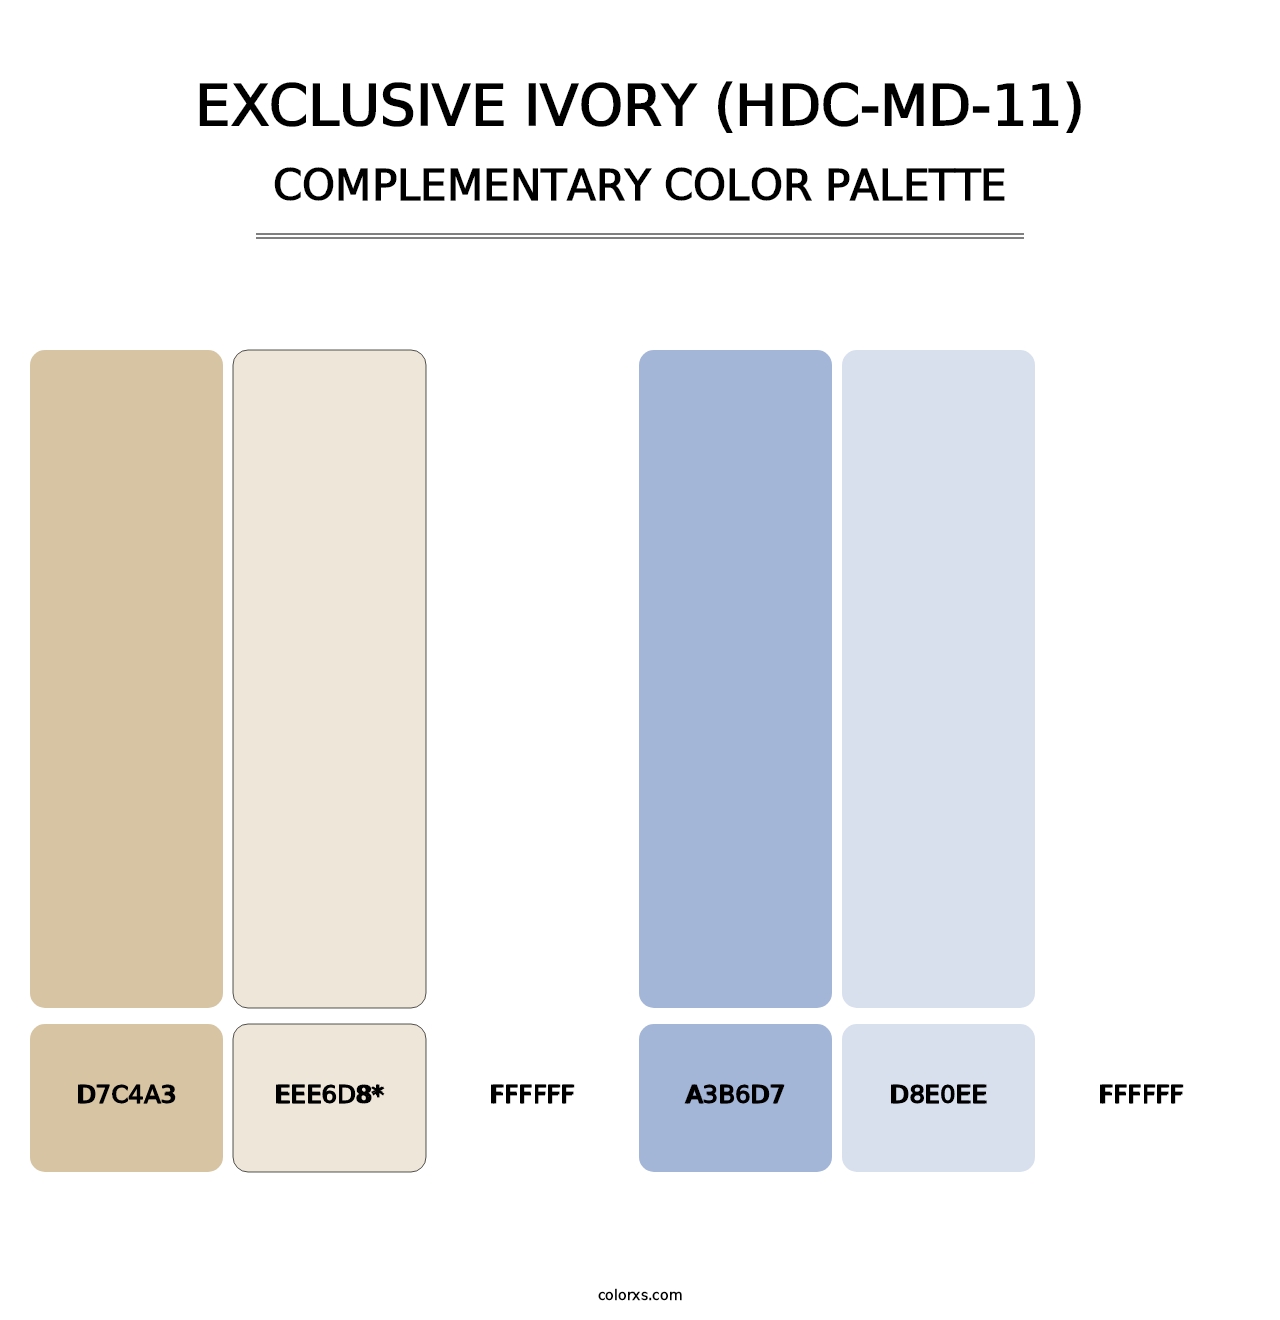 Exclusive Ivory (HDC-MD-11) - Complementary Color Palette